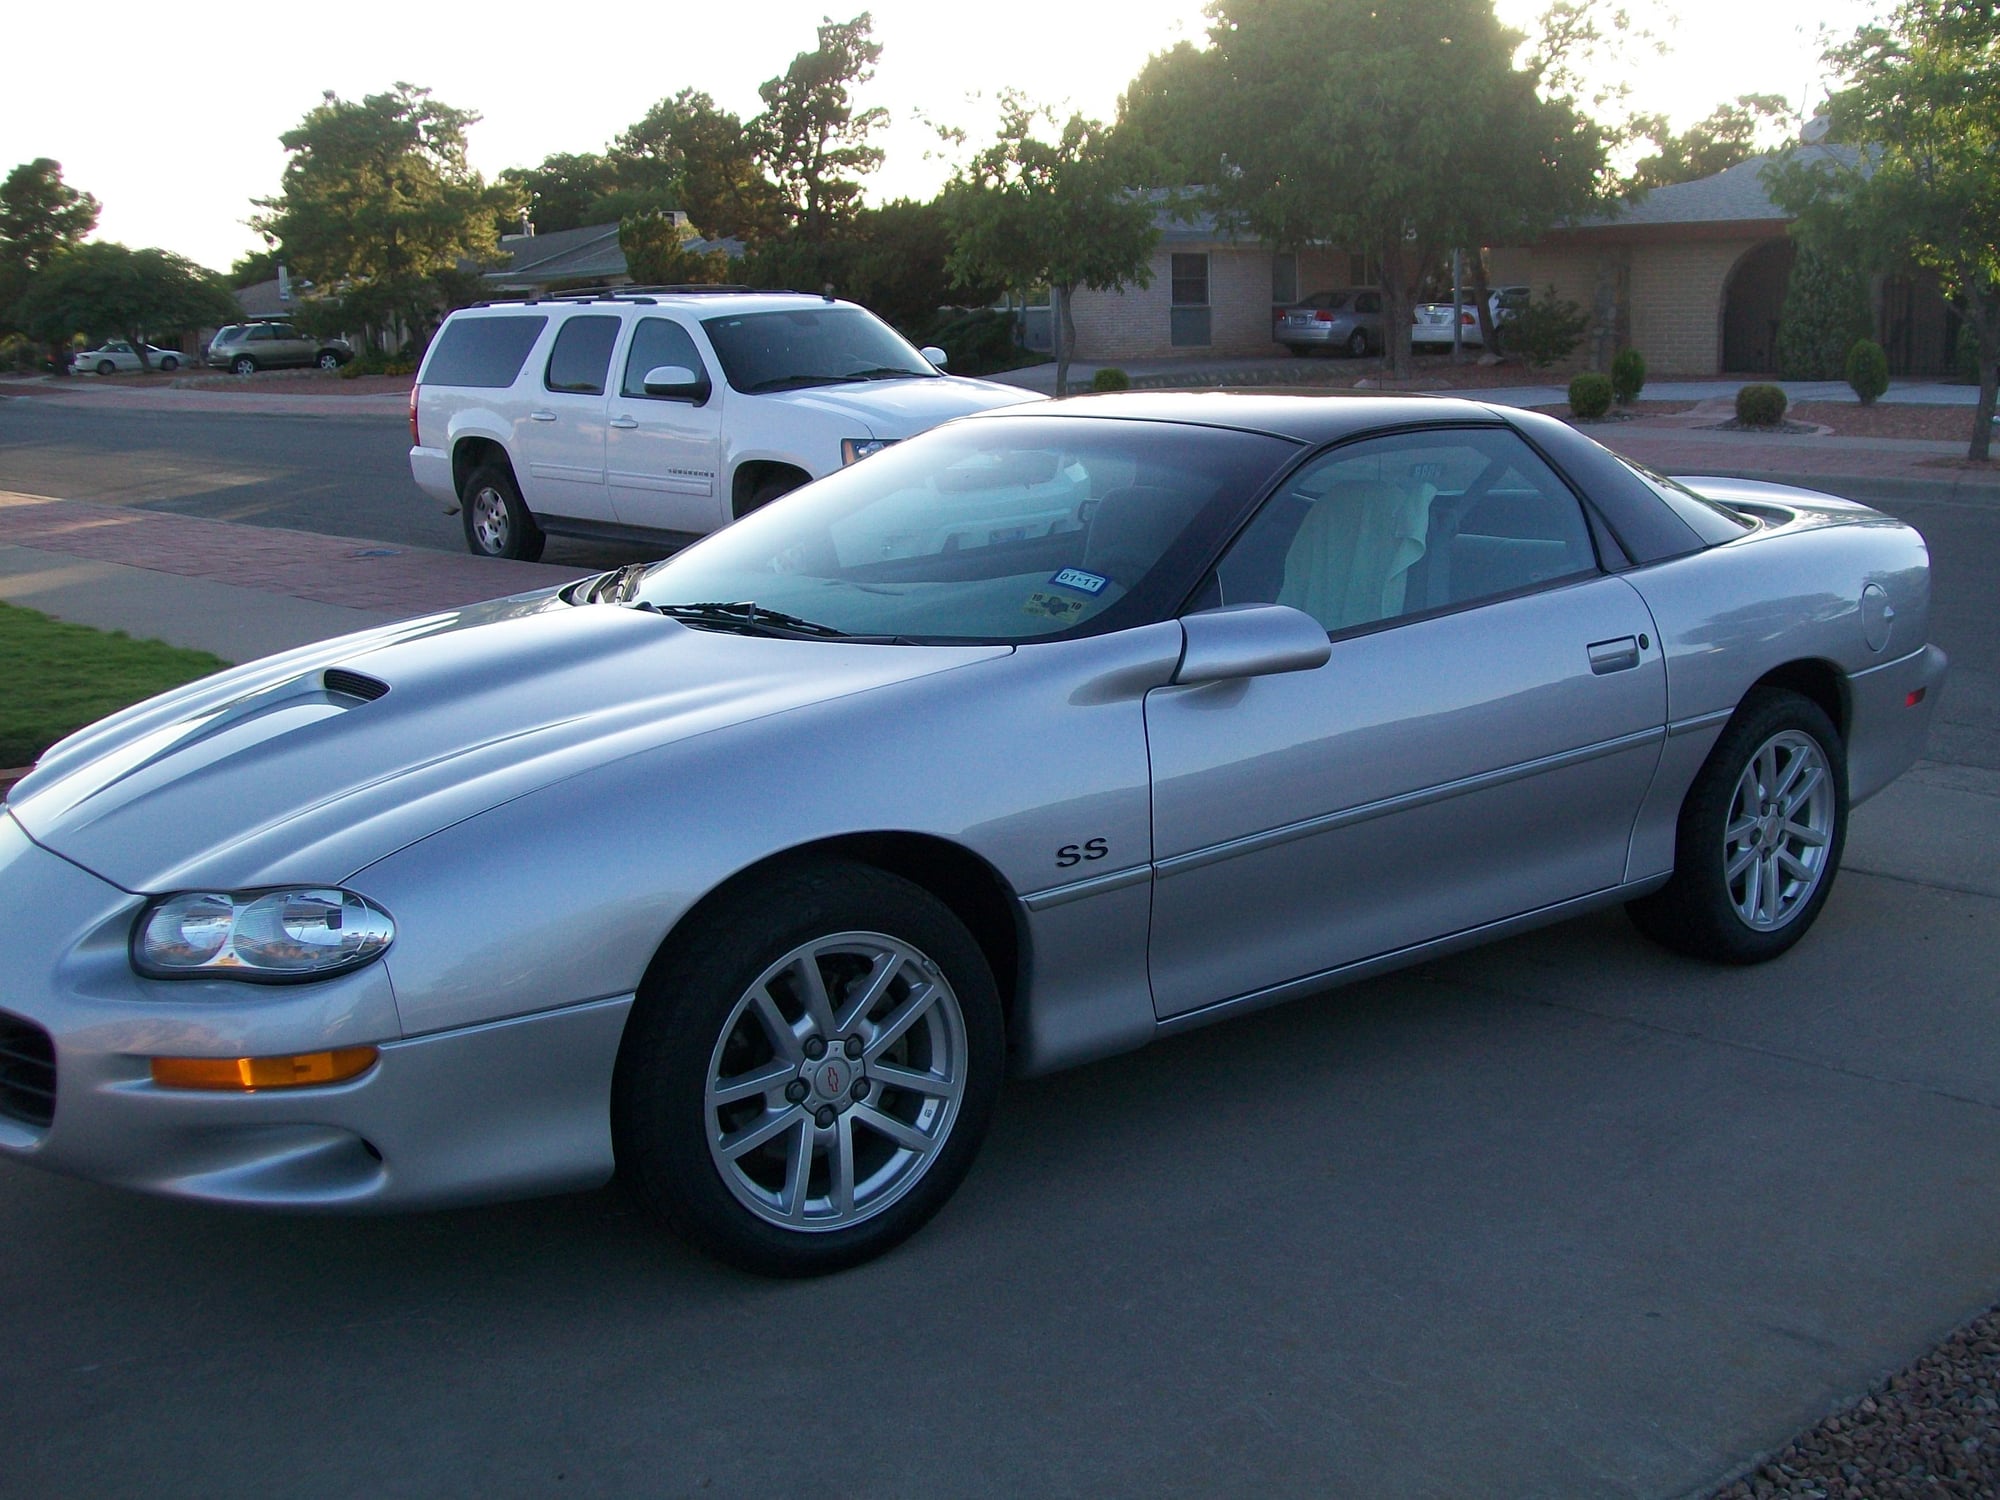 2002 Chevrolet Camaro - 2002 Chevrolet Camaro SS Hard Top M6 - Used - VIN 2G1FP22G522133553 - 62,401 Miles - 8 cyl - 2WD - Manual - Coupe - Silver - El Paso, TX 79925, United States